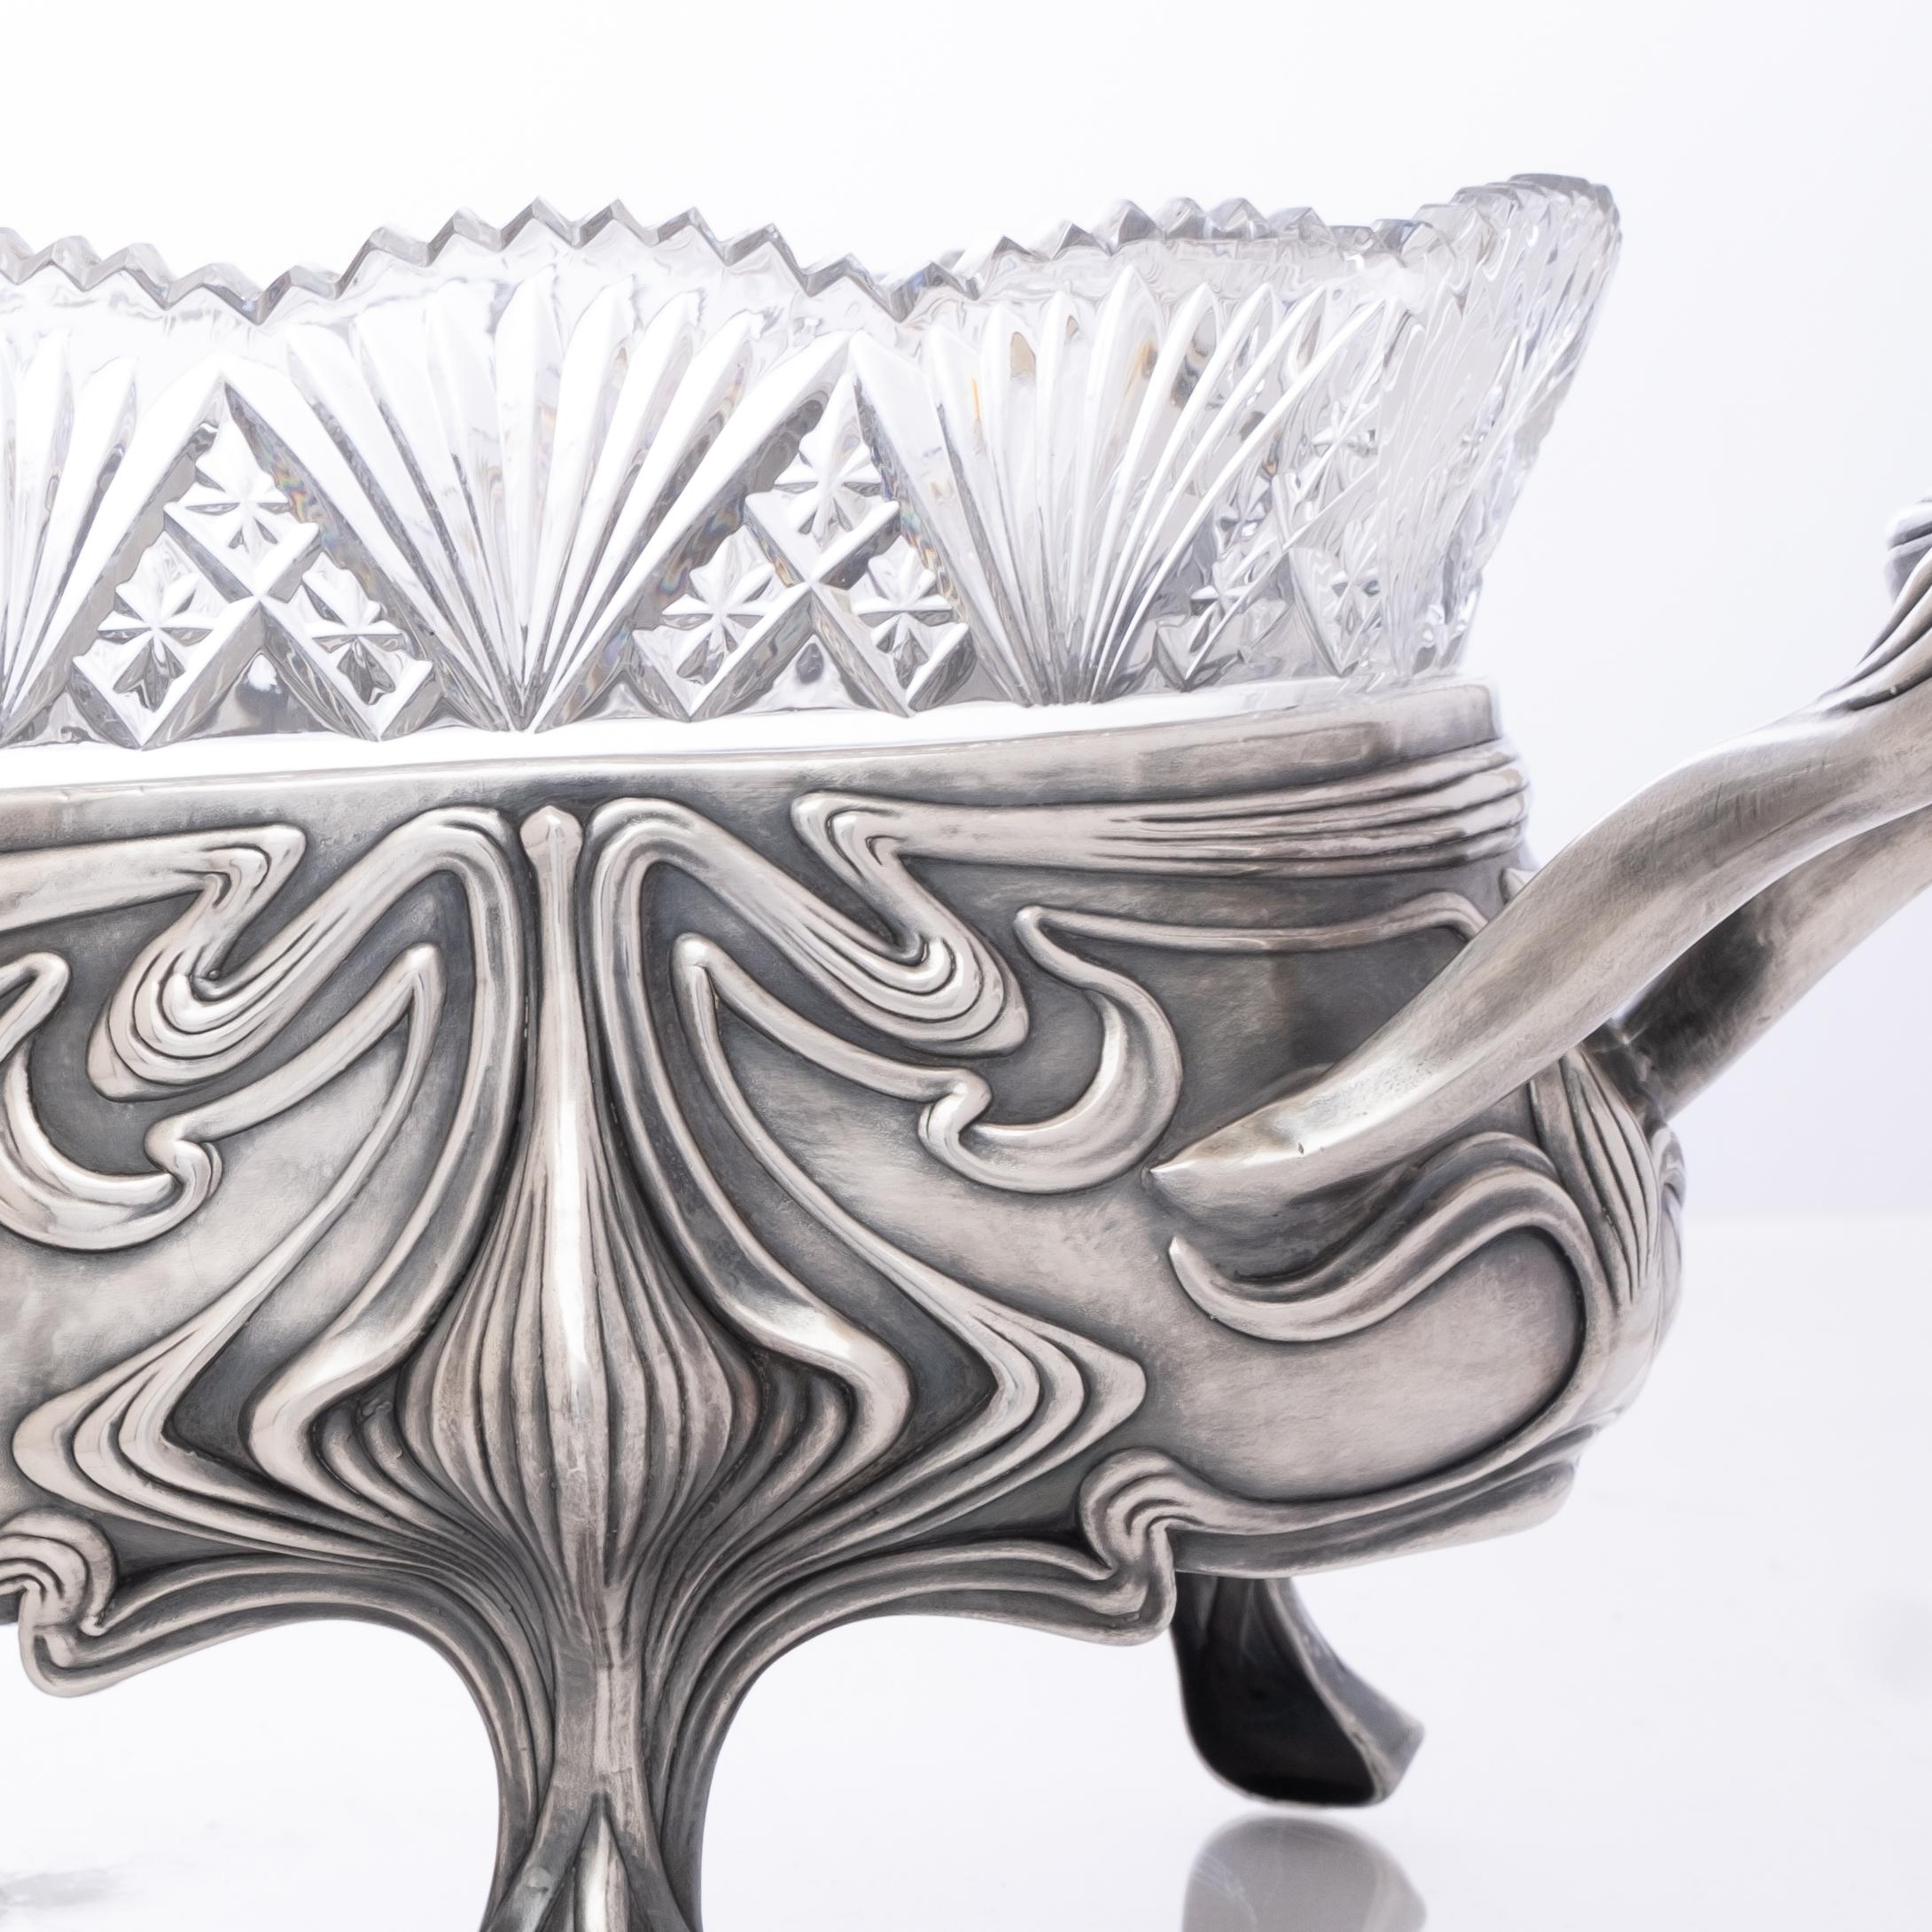 Large german art nouveau period 800 silver centerpiece with removable crystal insert. Marks to silver include crescent moon & crown, 800 silver & maker's hallmarks. Approx. 24.55 troy ounces. Very good. No monograms. Crystal insert is also very